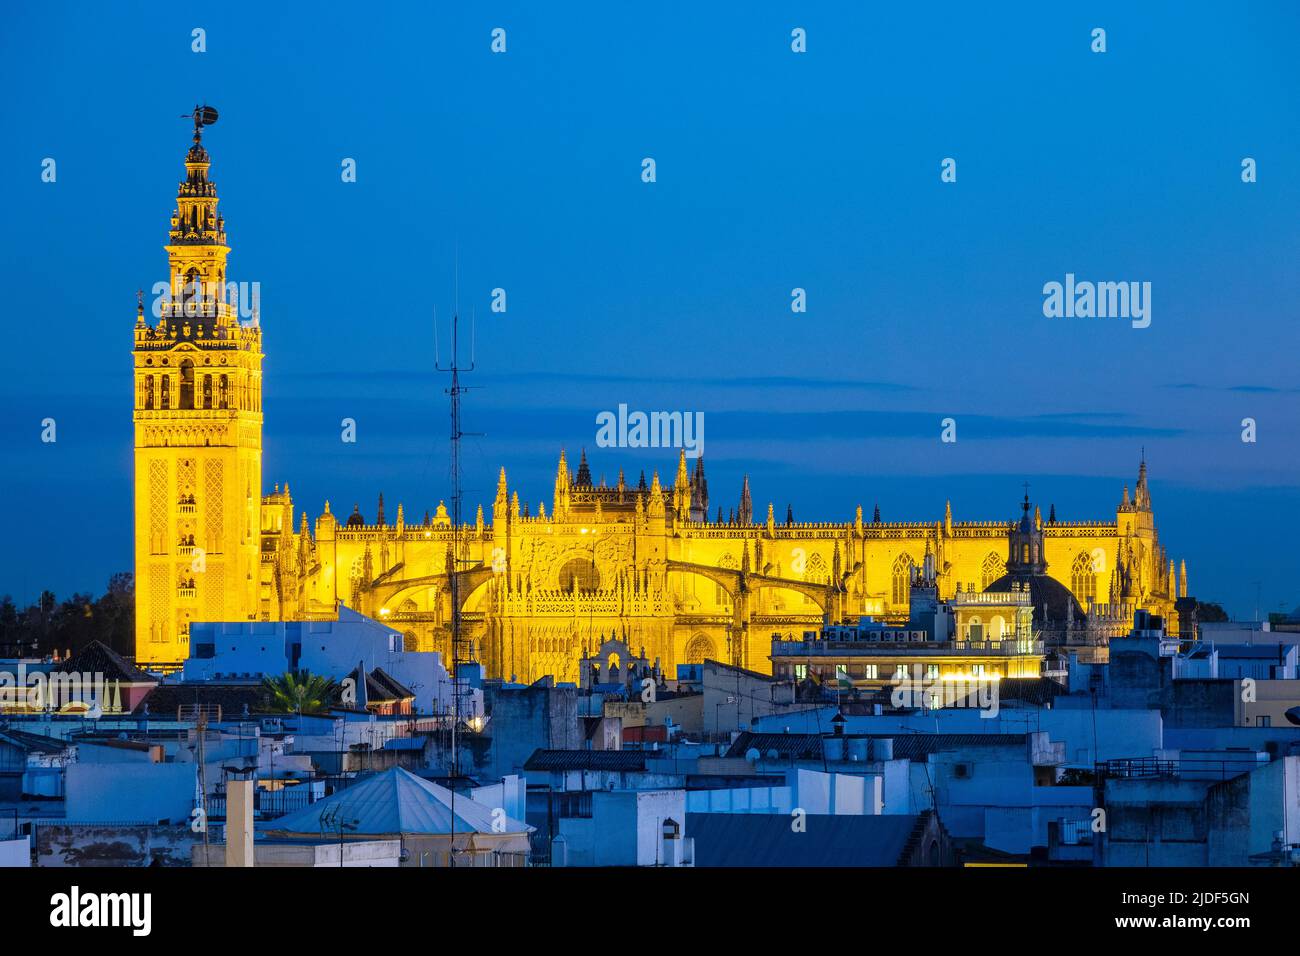 The Cathedral of Saint Mary of the See (Catedral de Santa María de la Sede), Lights Up At Night Seville Cathedral, Seville City Skyline Seville Spain Stock Photo